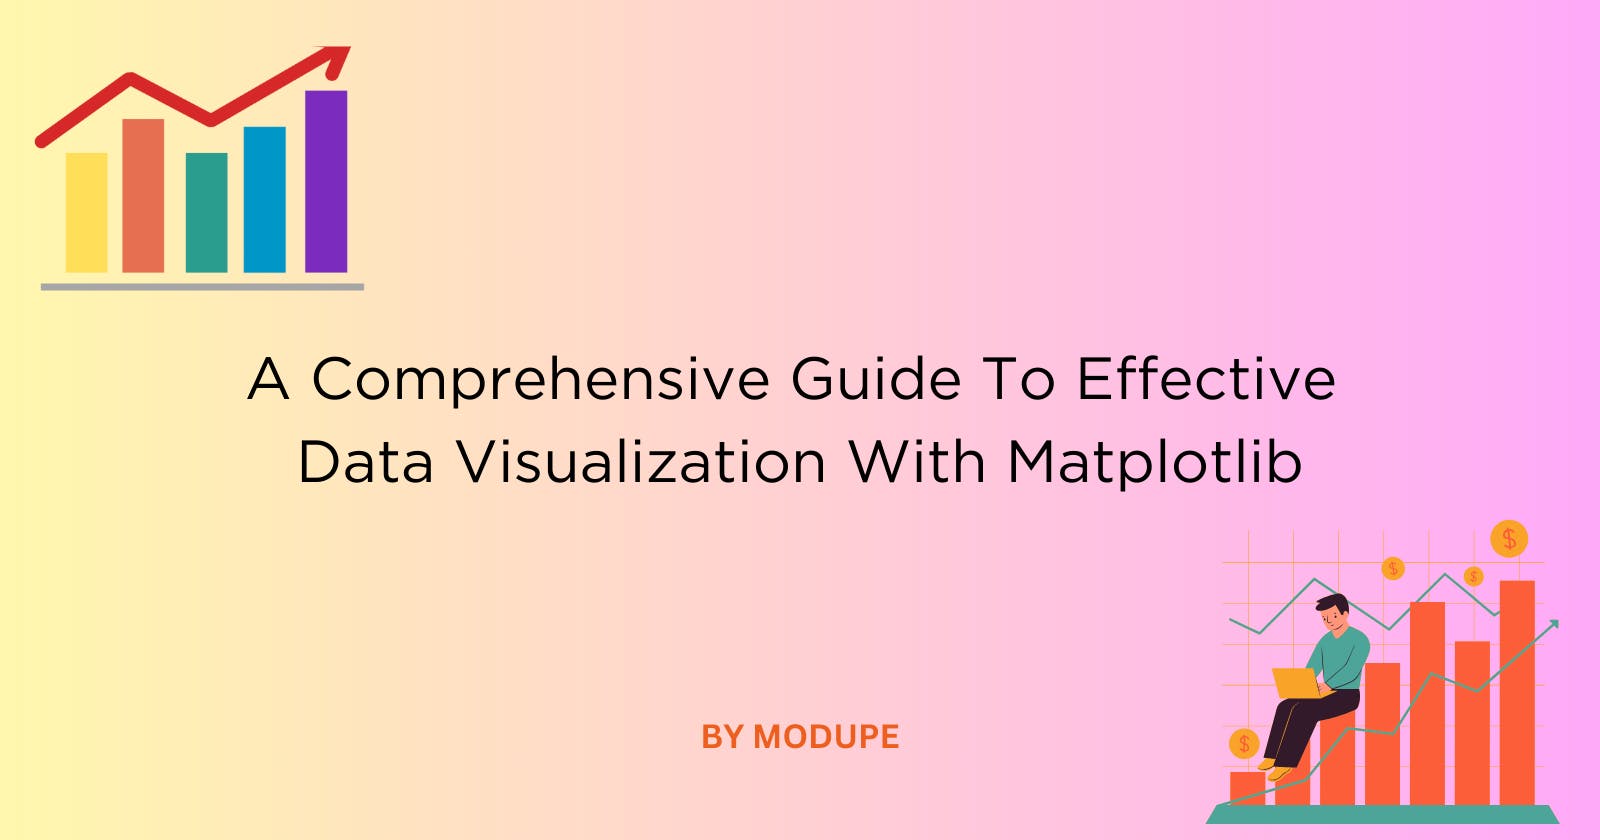 A Comprehensive Guide To Effective Data Visualization With Matplotlib